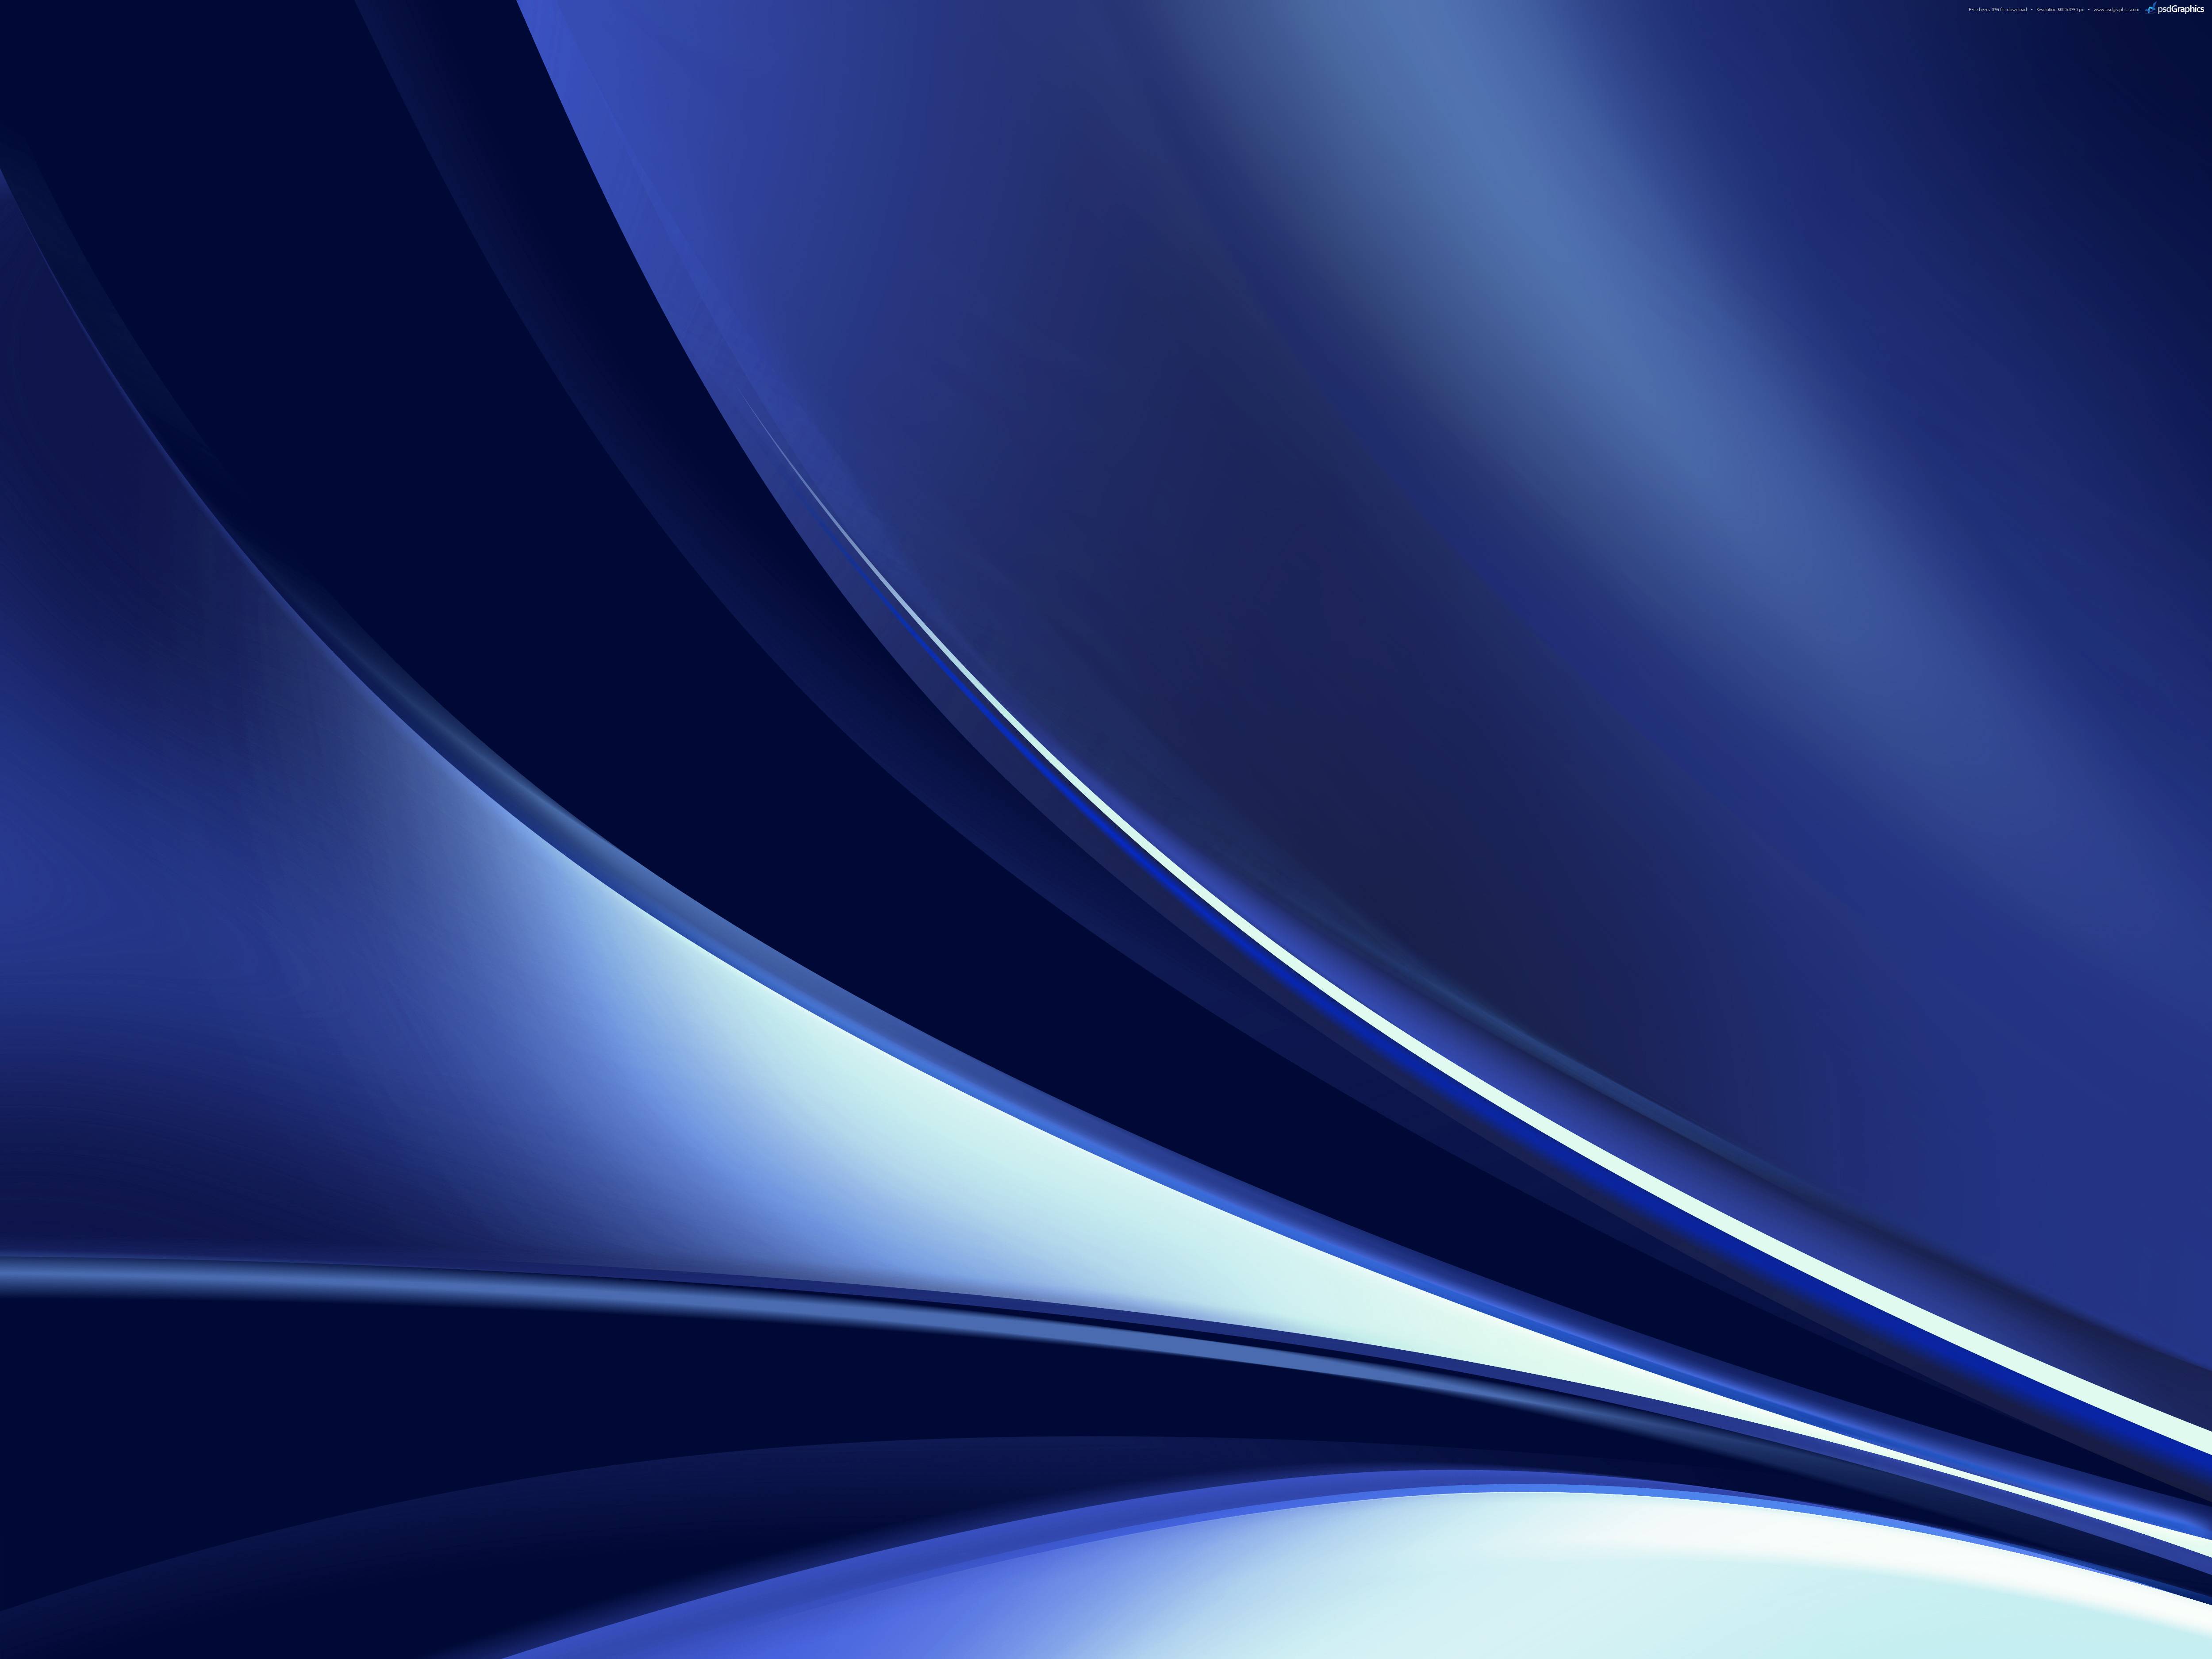 Abstract dark blue backgrounds